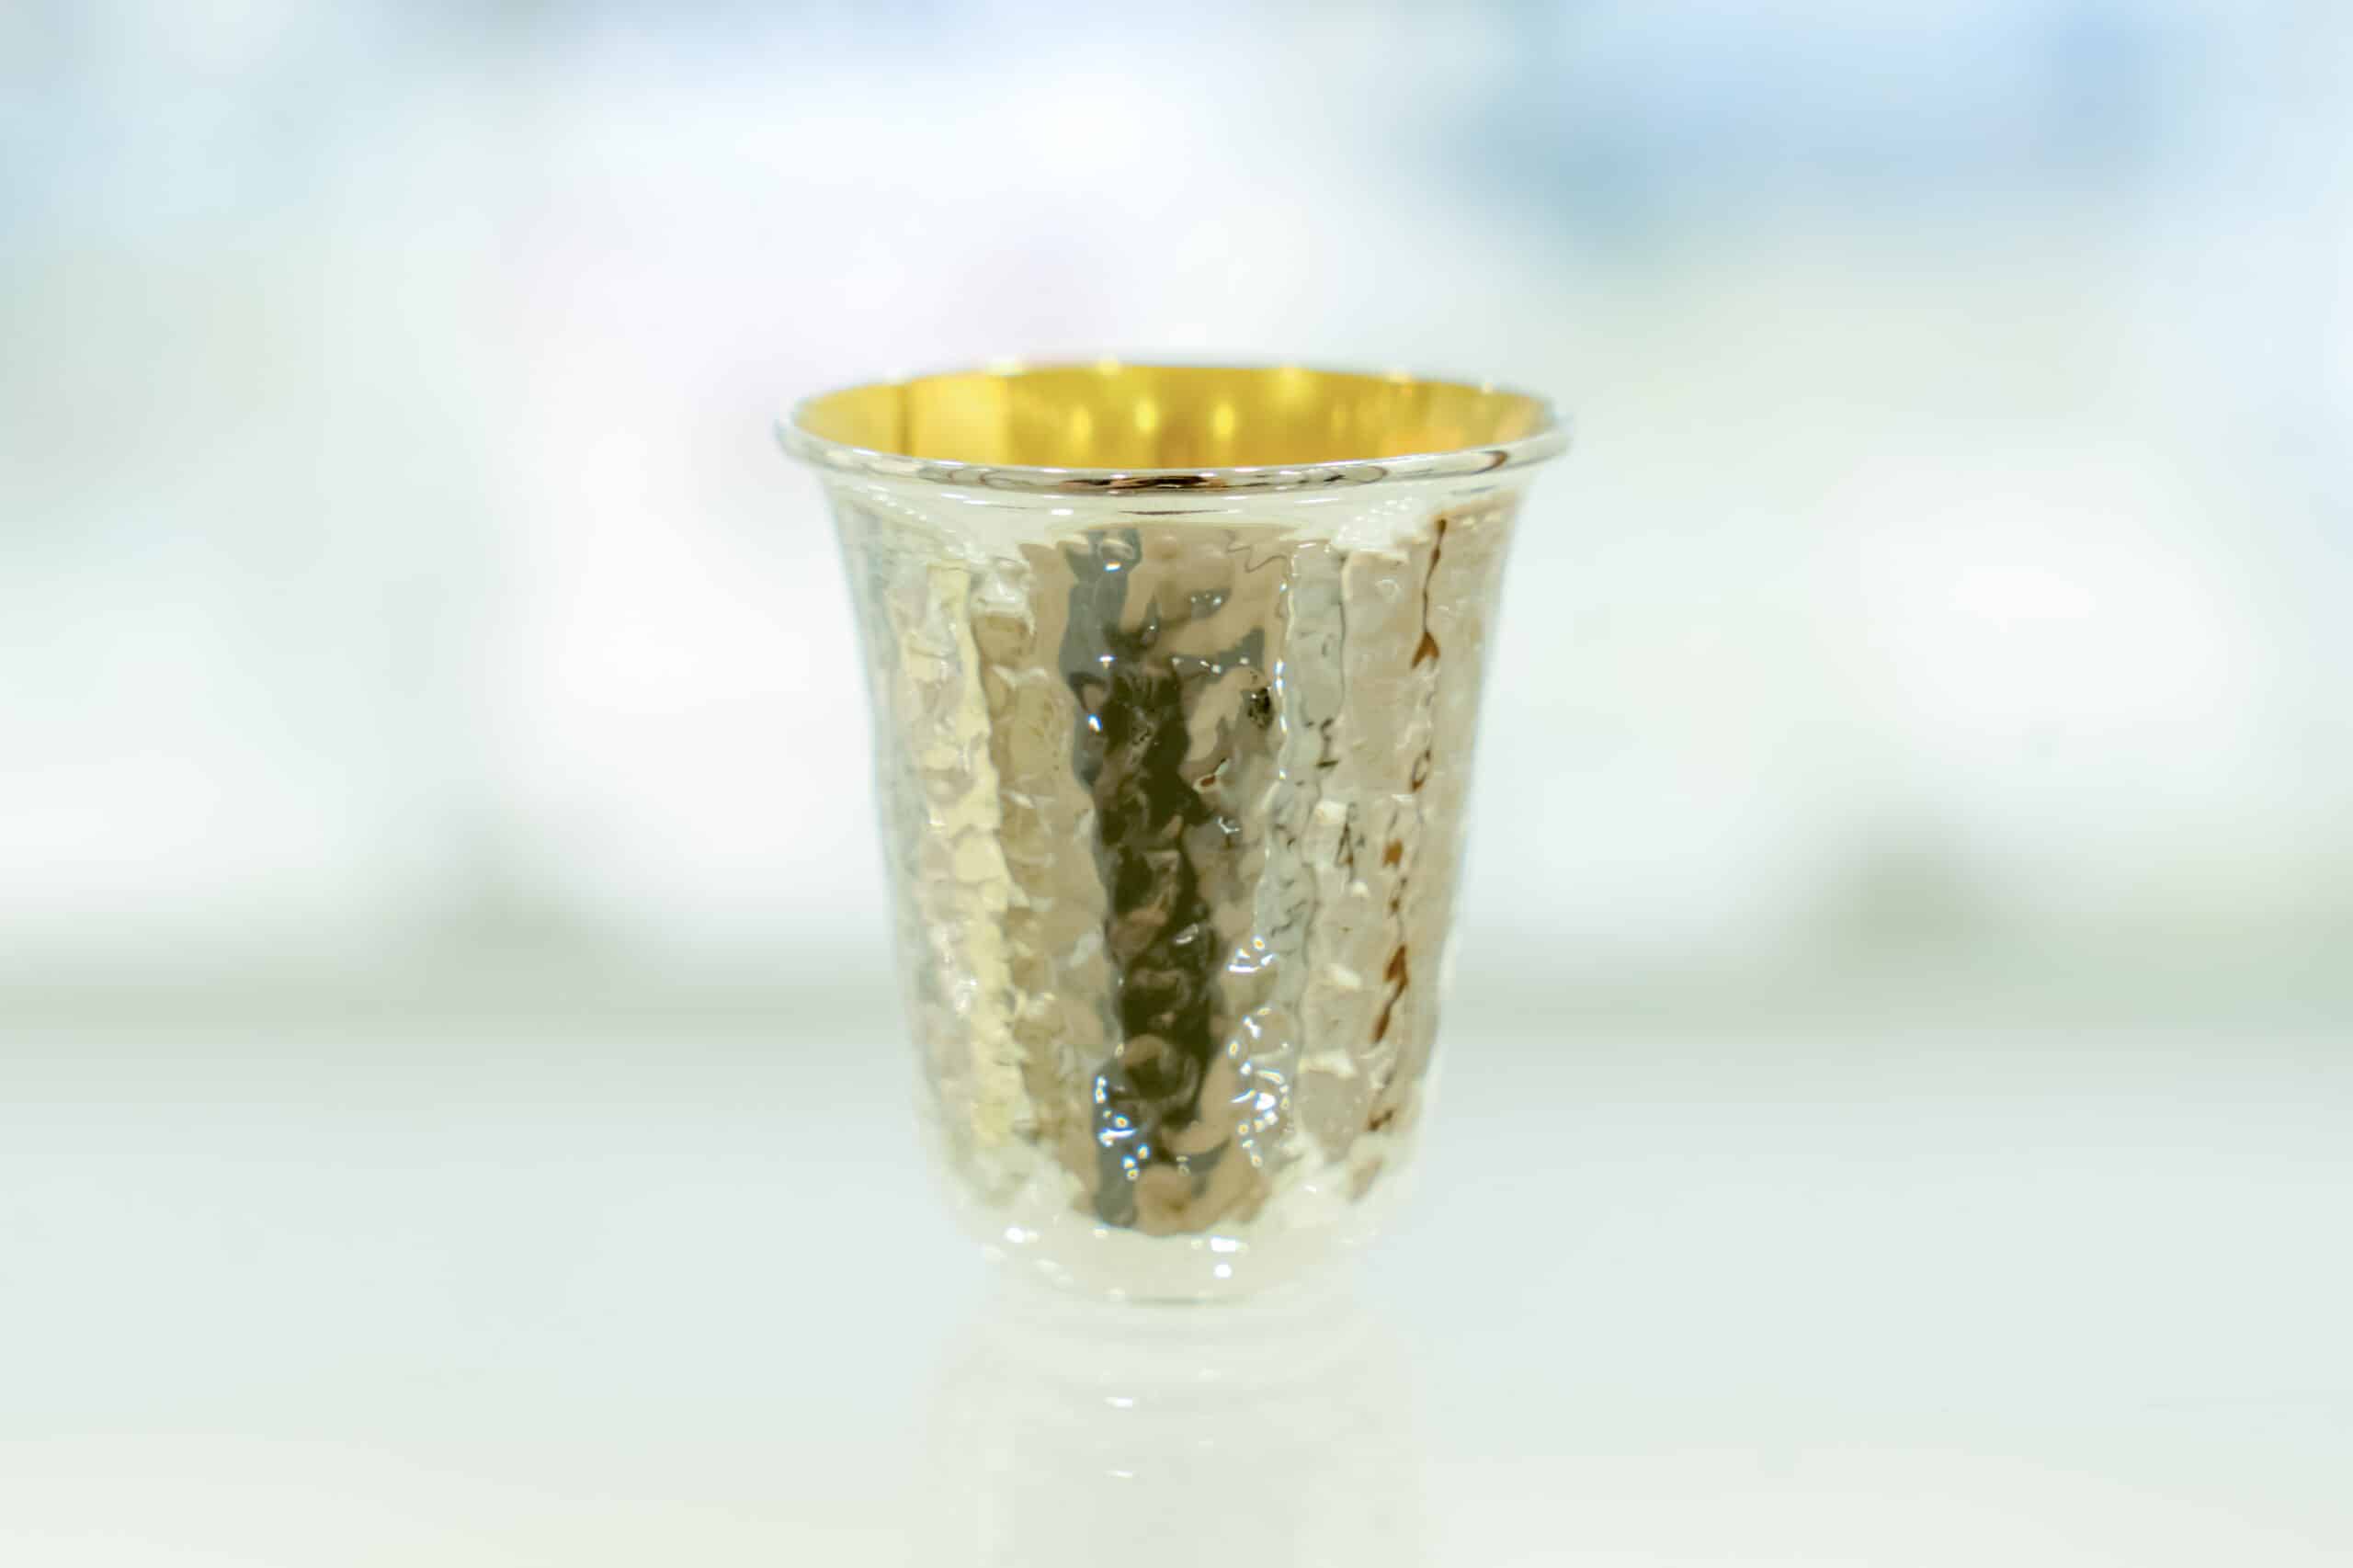 Classic Cone-Shaped Sterling Silver Good Boy/Girl Kiddush Cup